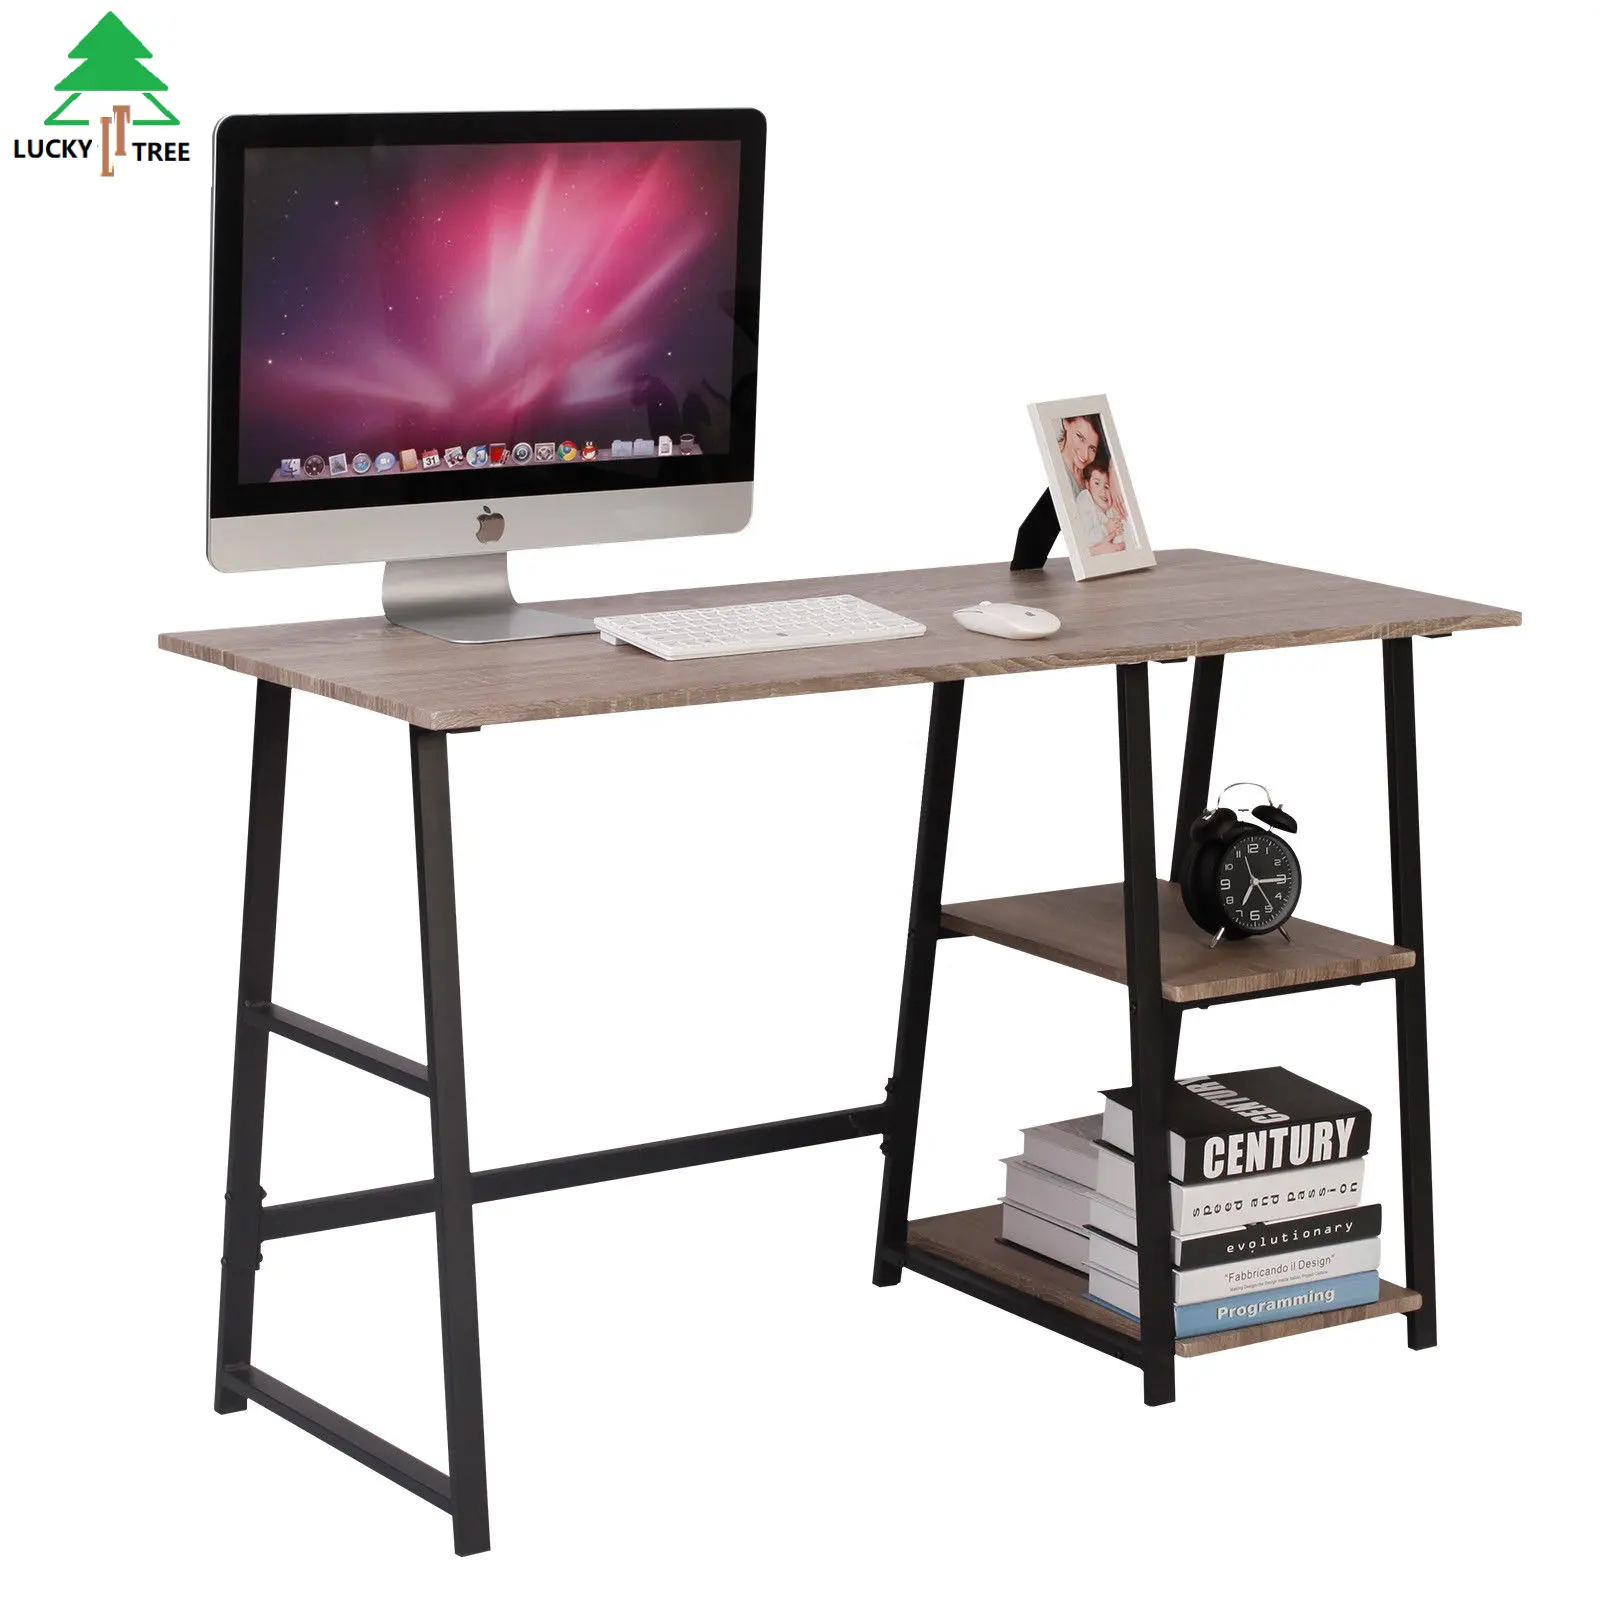 Homework help workstation office computer living room reading table study sit stand desk executive office desk wood table